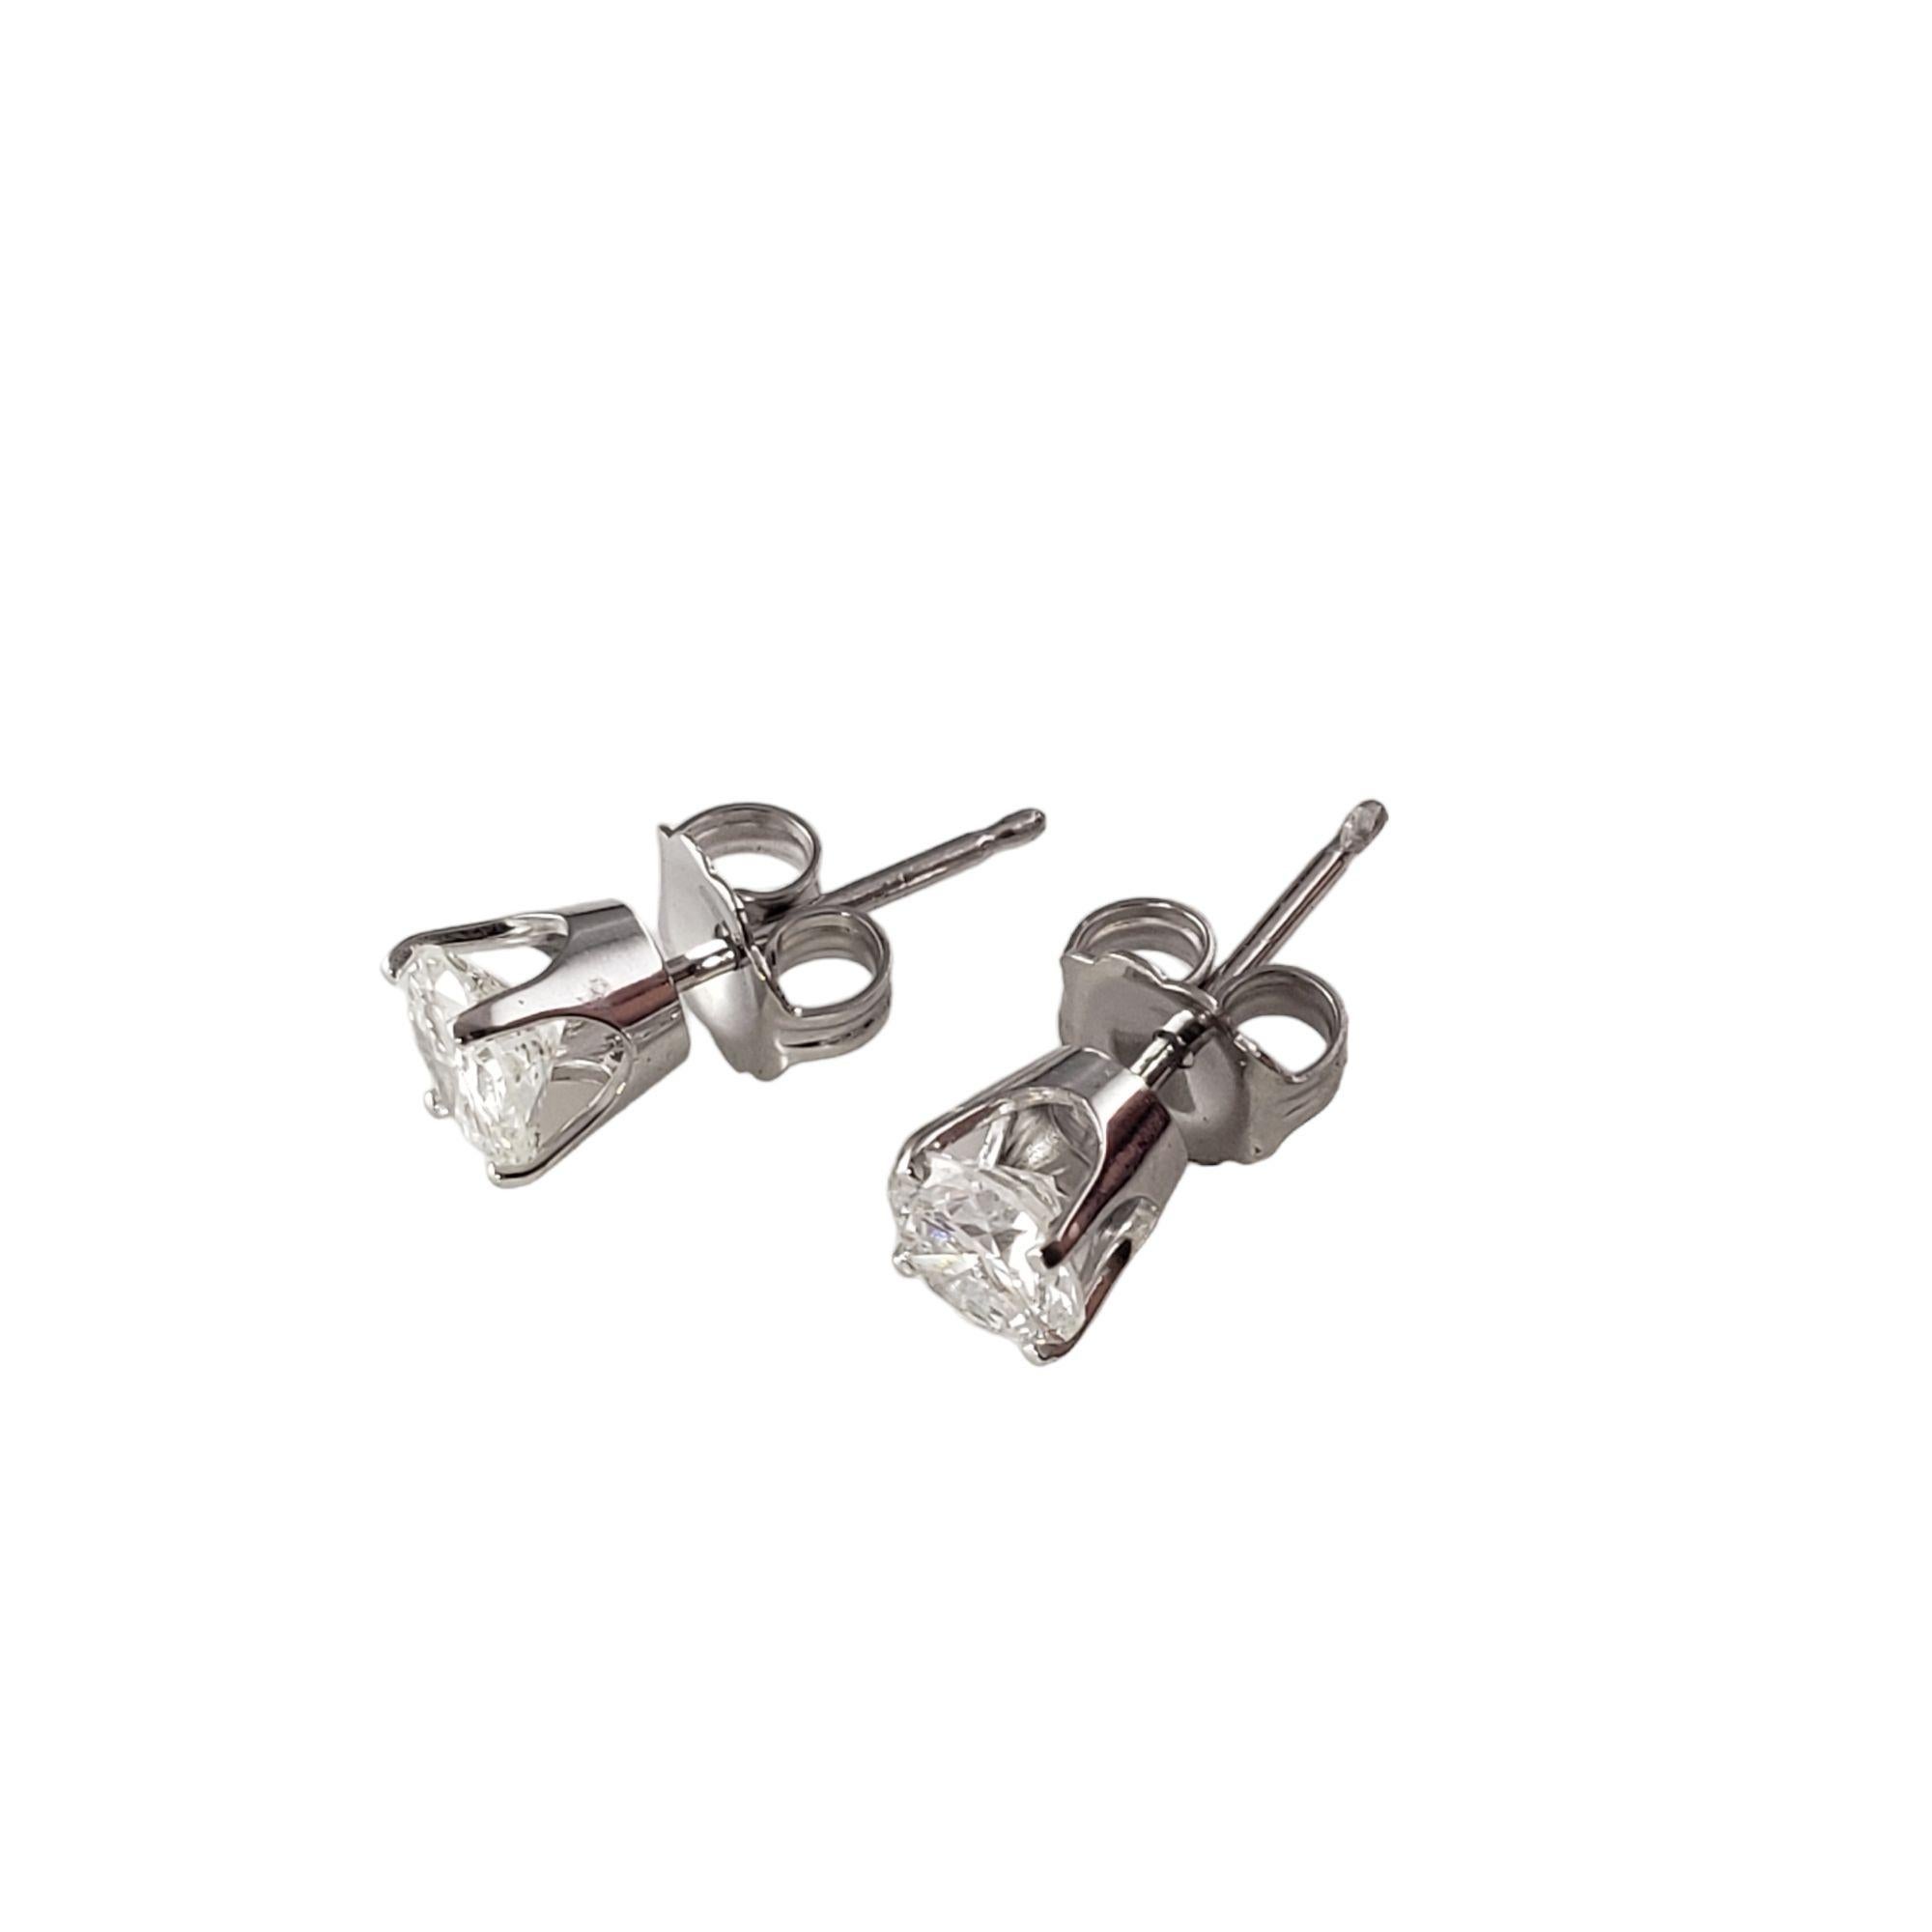 Vintage 14 Karat White Gold Diamond Stud Earrings .90 TCW. JAGi Certified-

These sparkling stud earrings each feature one round brilliant cut diamond set in classic 14K white gold. Push back closures.

Total diamond weight: .90 ct.

Diamond color: